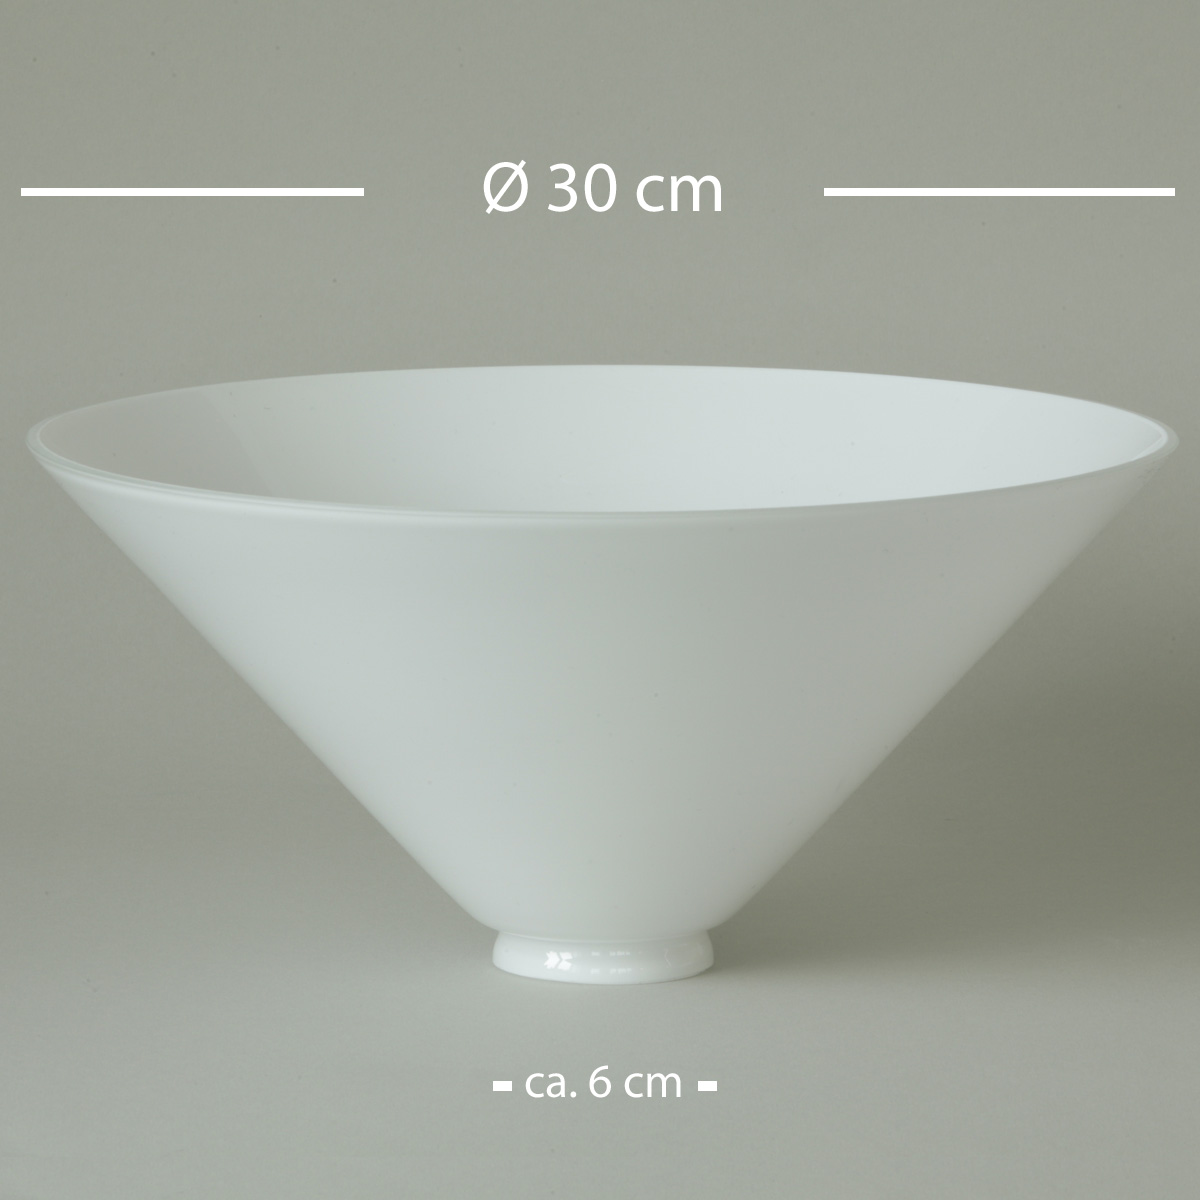 Cobbler glass: replacement glass Ø 30 cm in opal white with Ø 6 cm lip